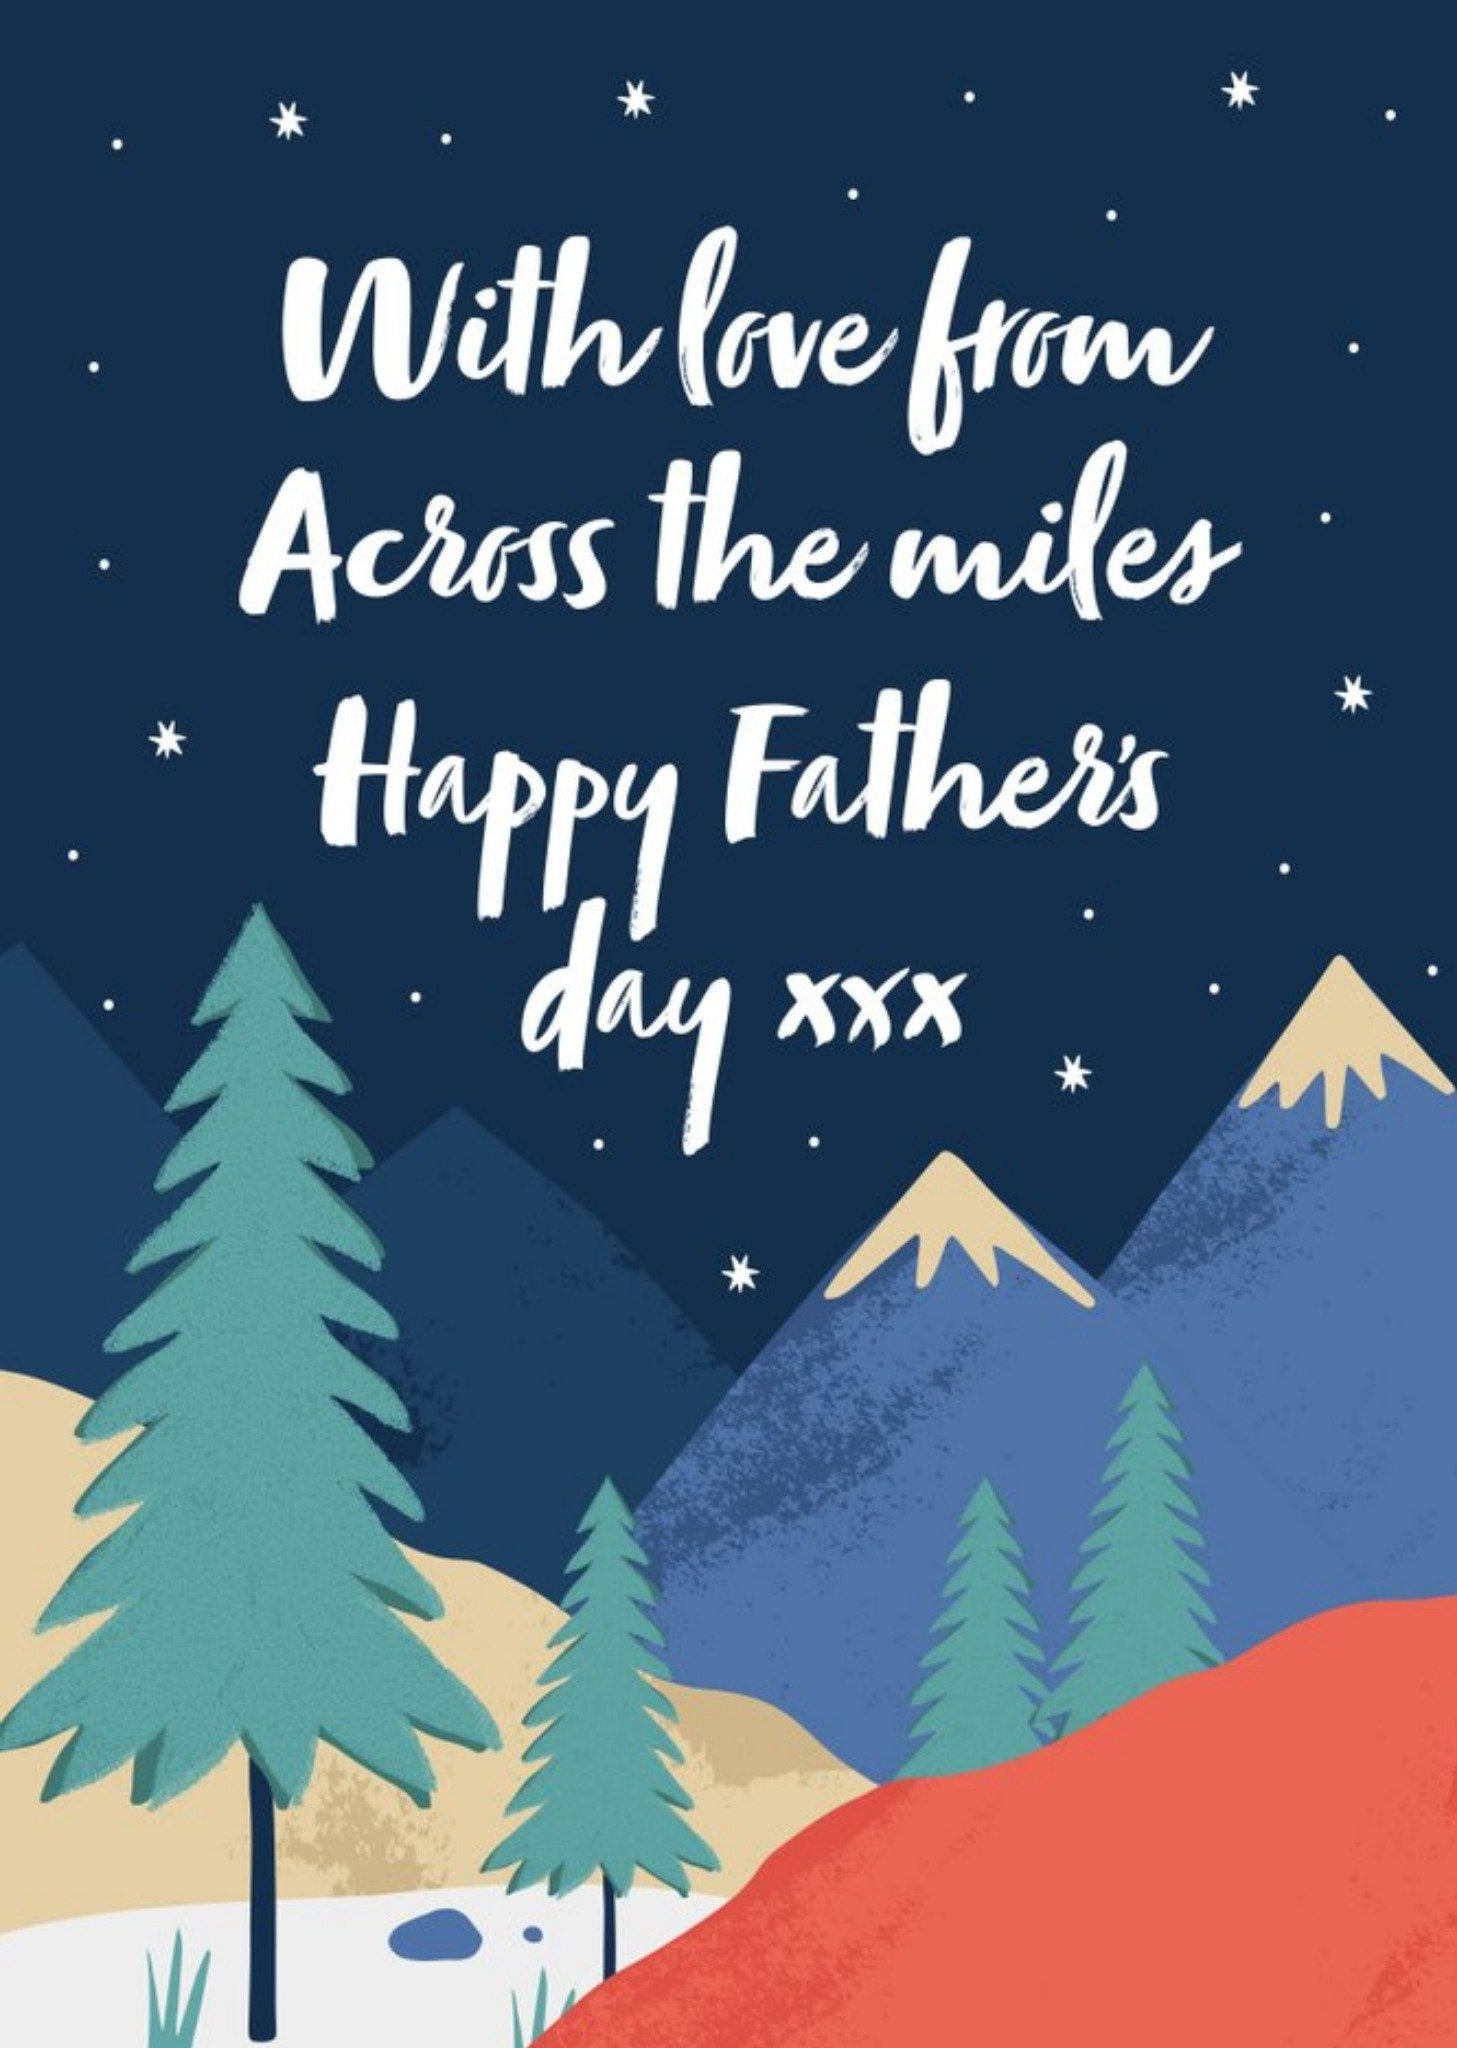 Moonpig Landscape With Love From Across The Miles Happy Father's Day Card, Large